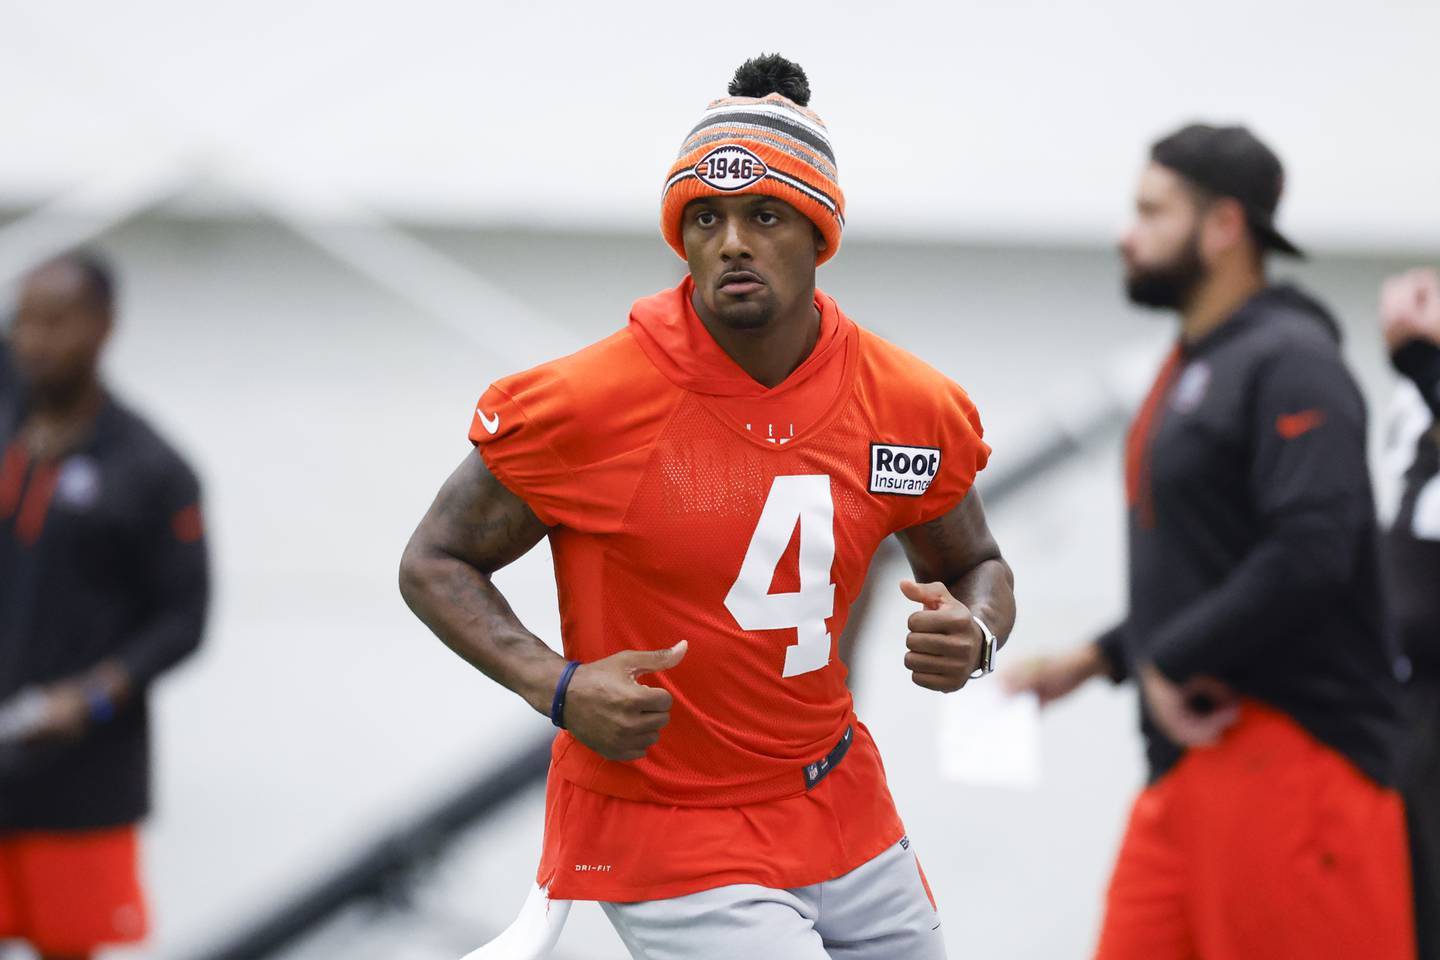 NFL suspends Deshaun Watson for 6 games after allegations of sexual abuse of 24 women